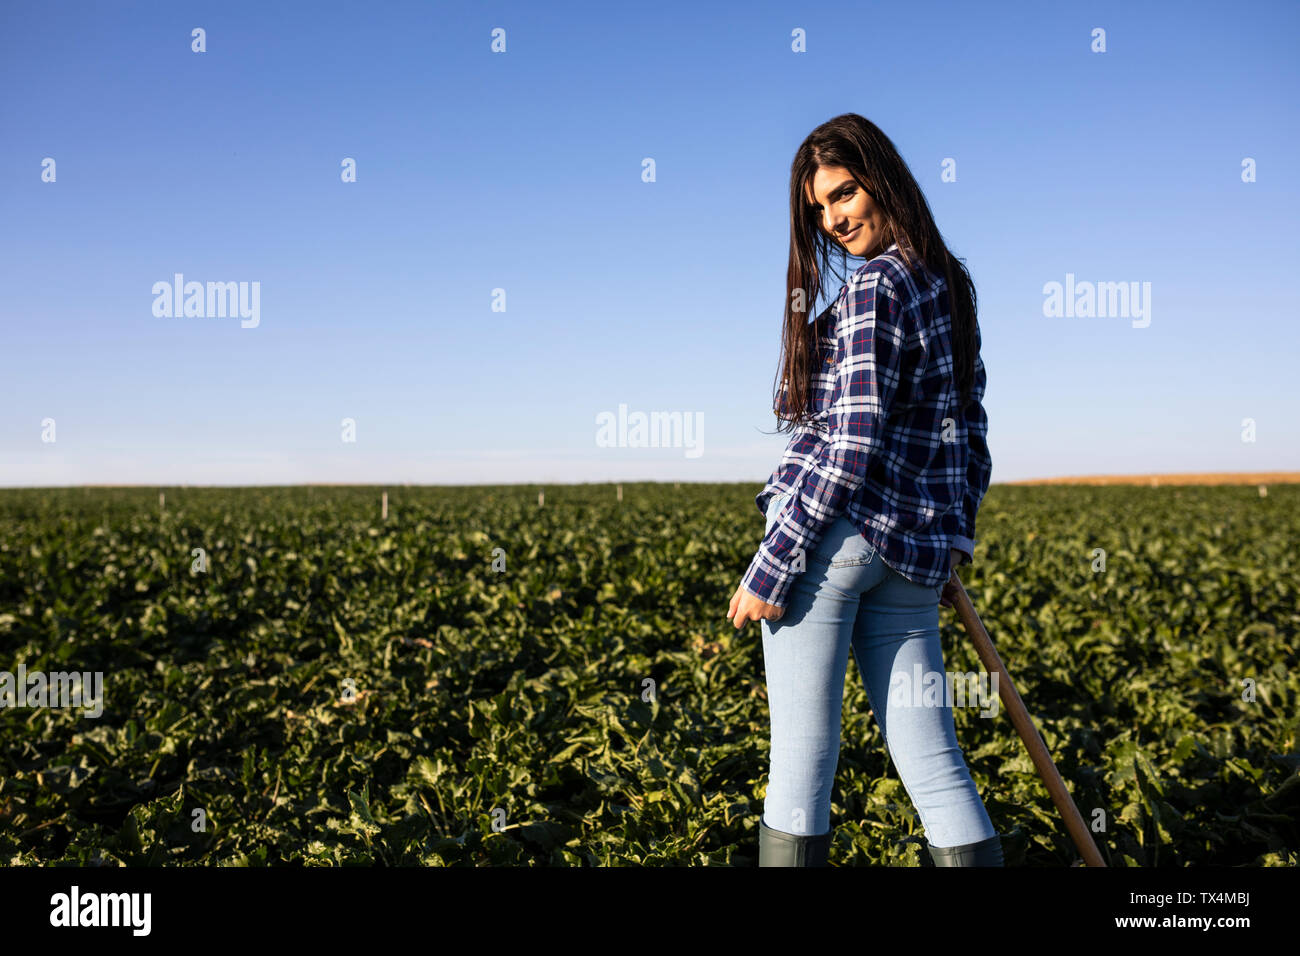 Young woman farmer with hoe on field, rear view Stock Photo